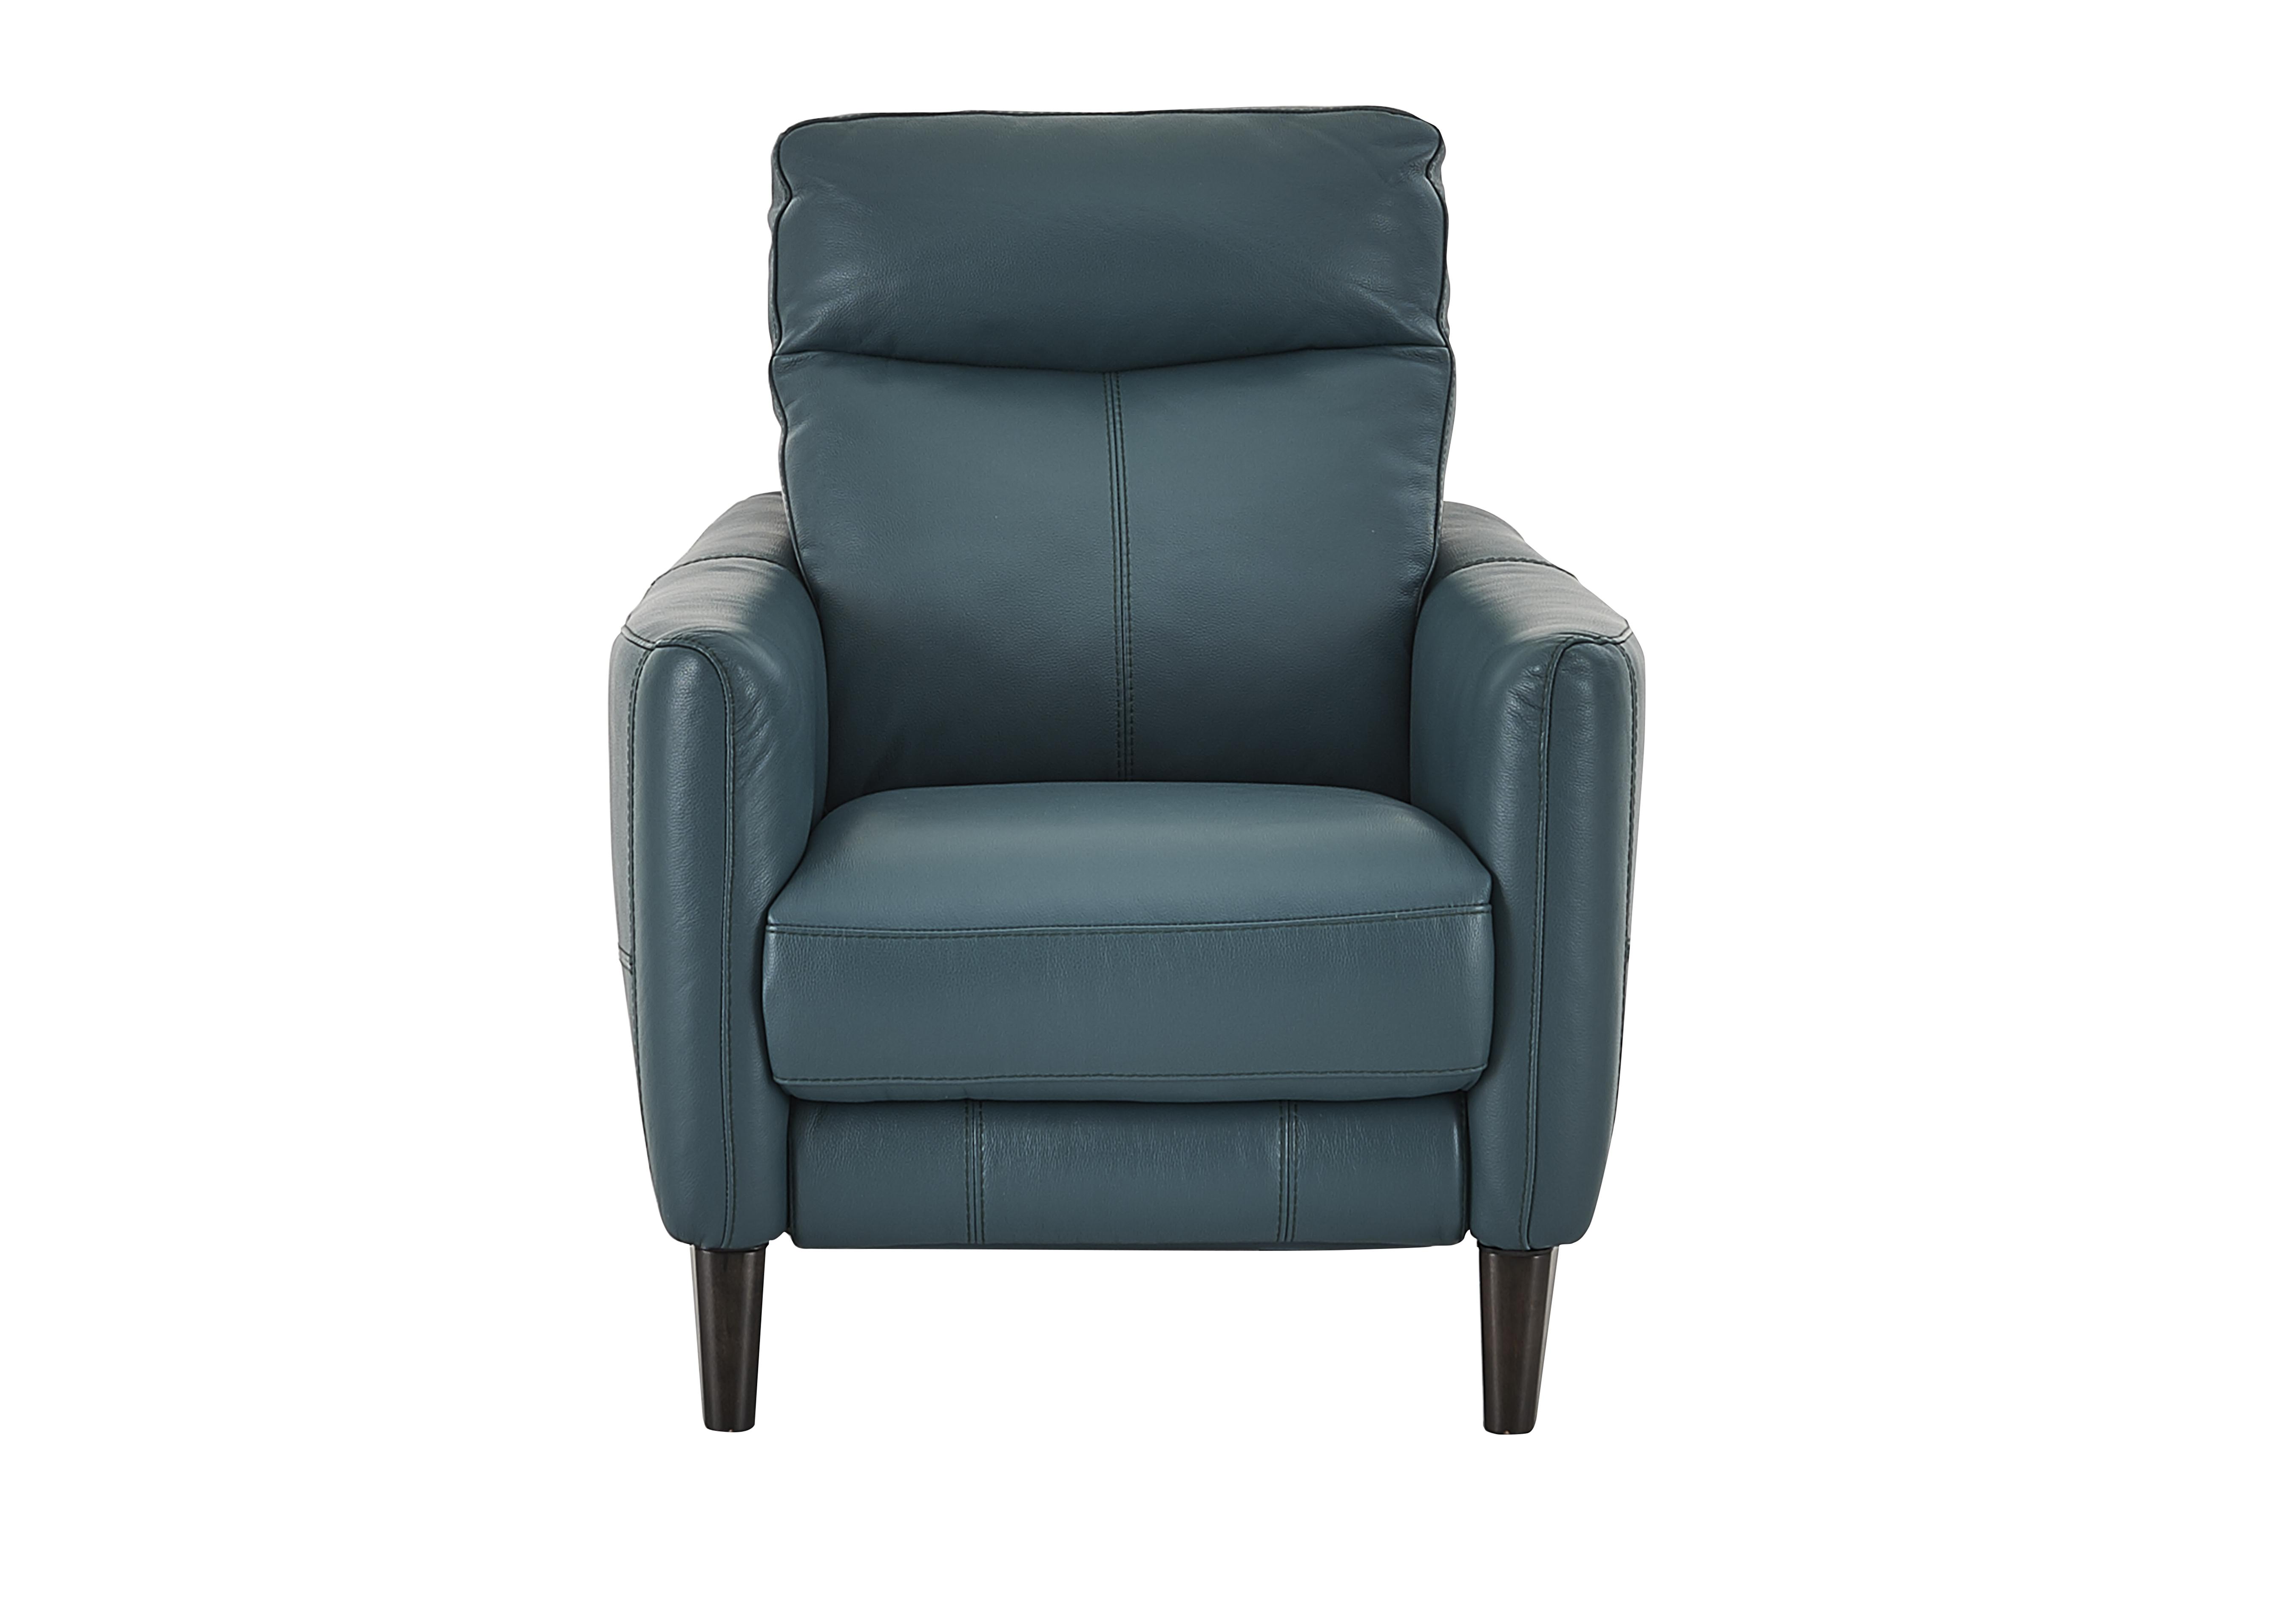 Compact Collection Petit Leather Recliner Armchair in Bv-301e Lake Green on Furniture Village